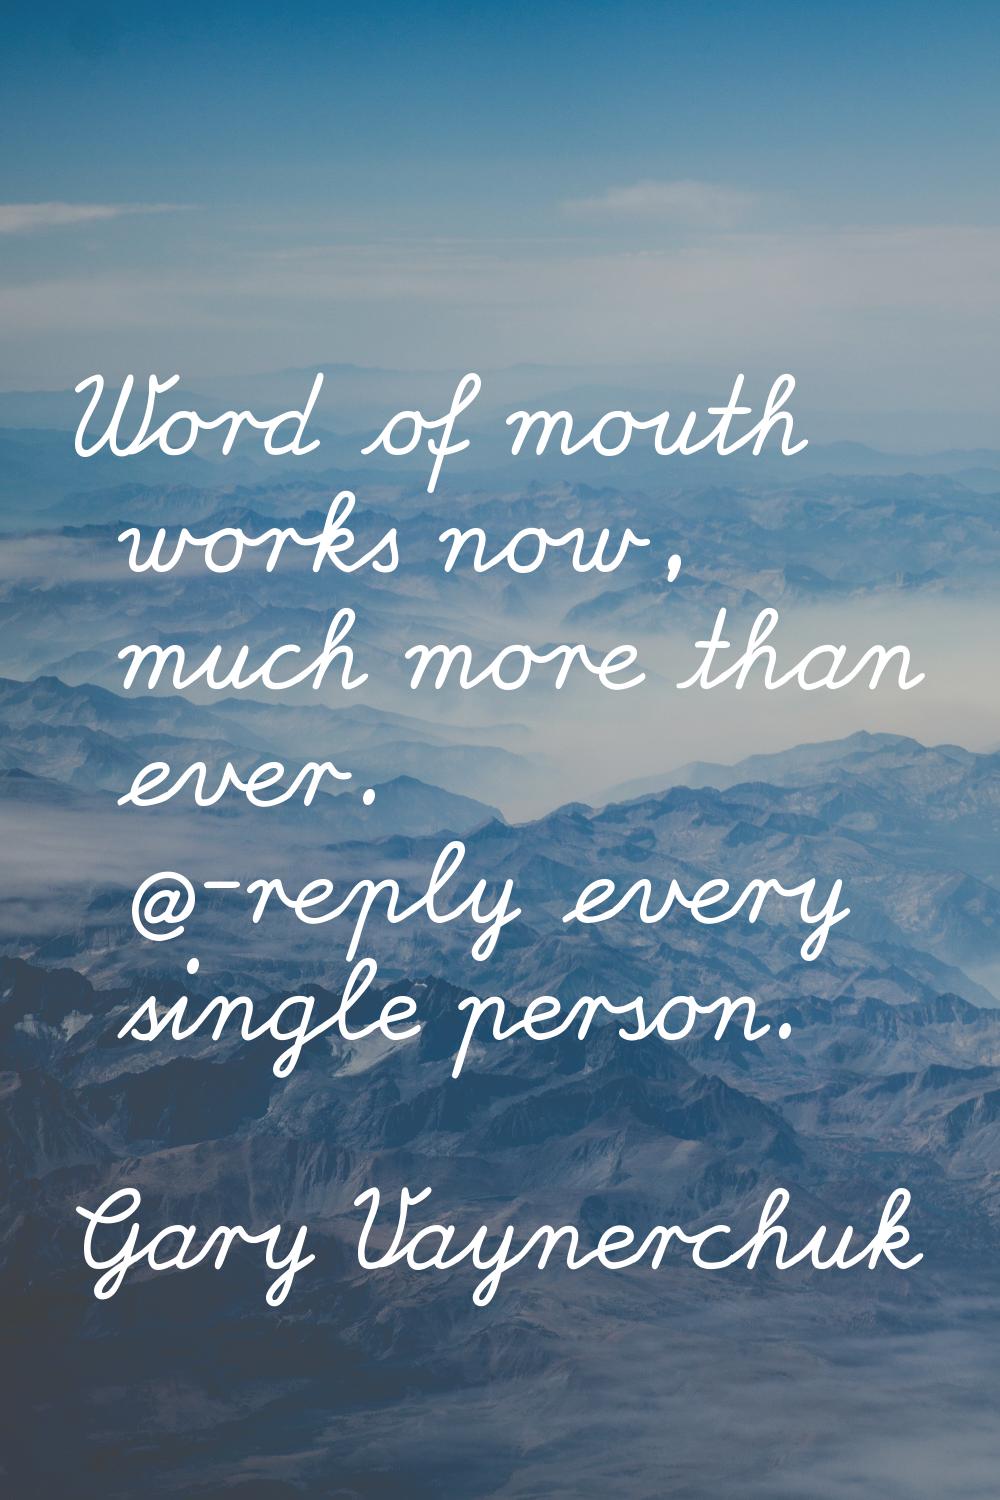 Word of mouth works now, much more than ever. @-reply every single person.